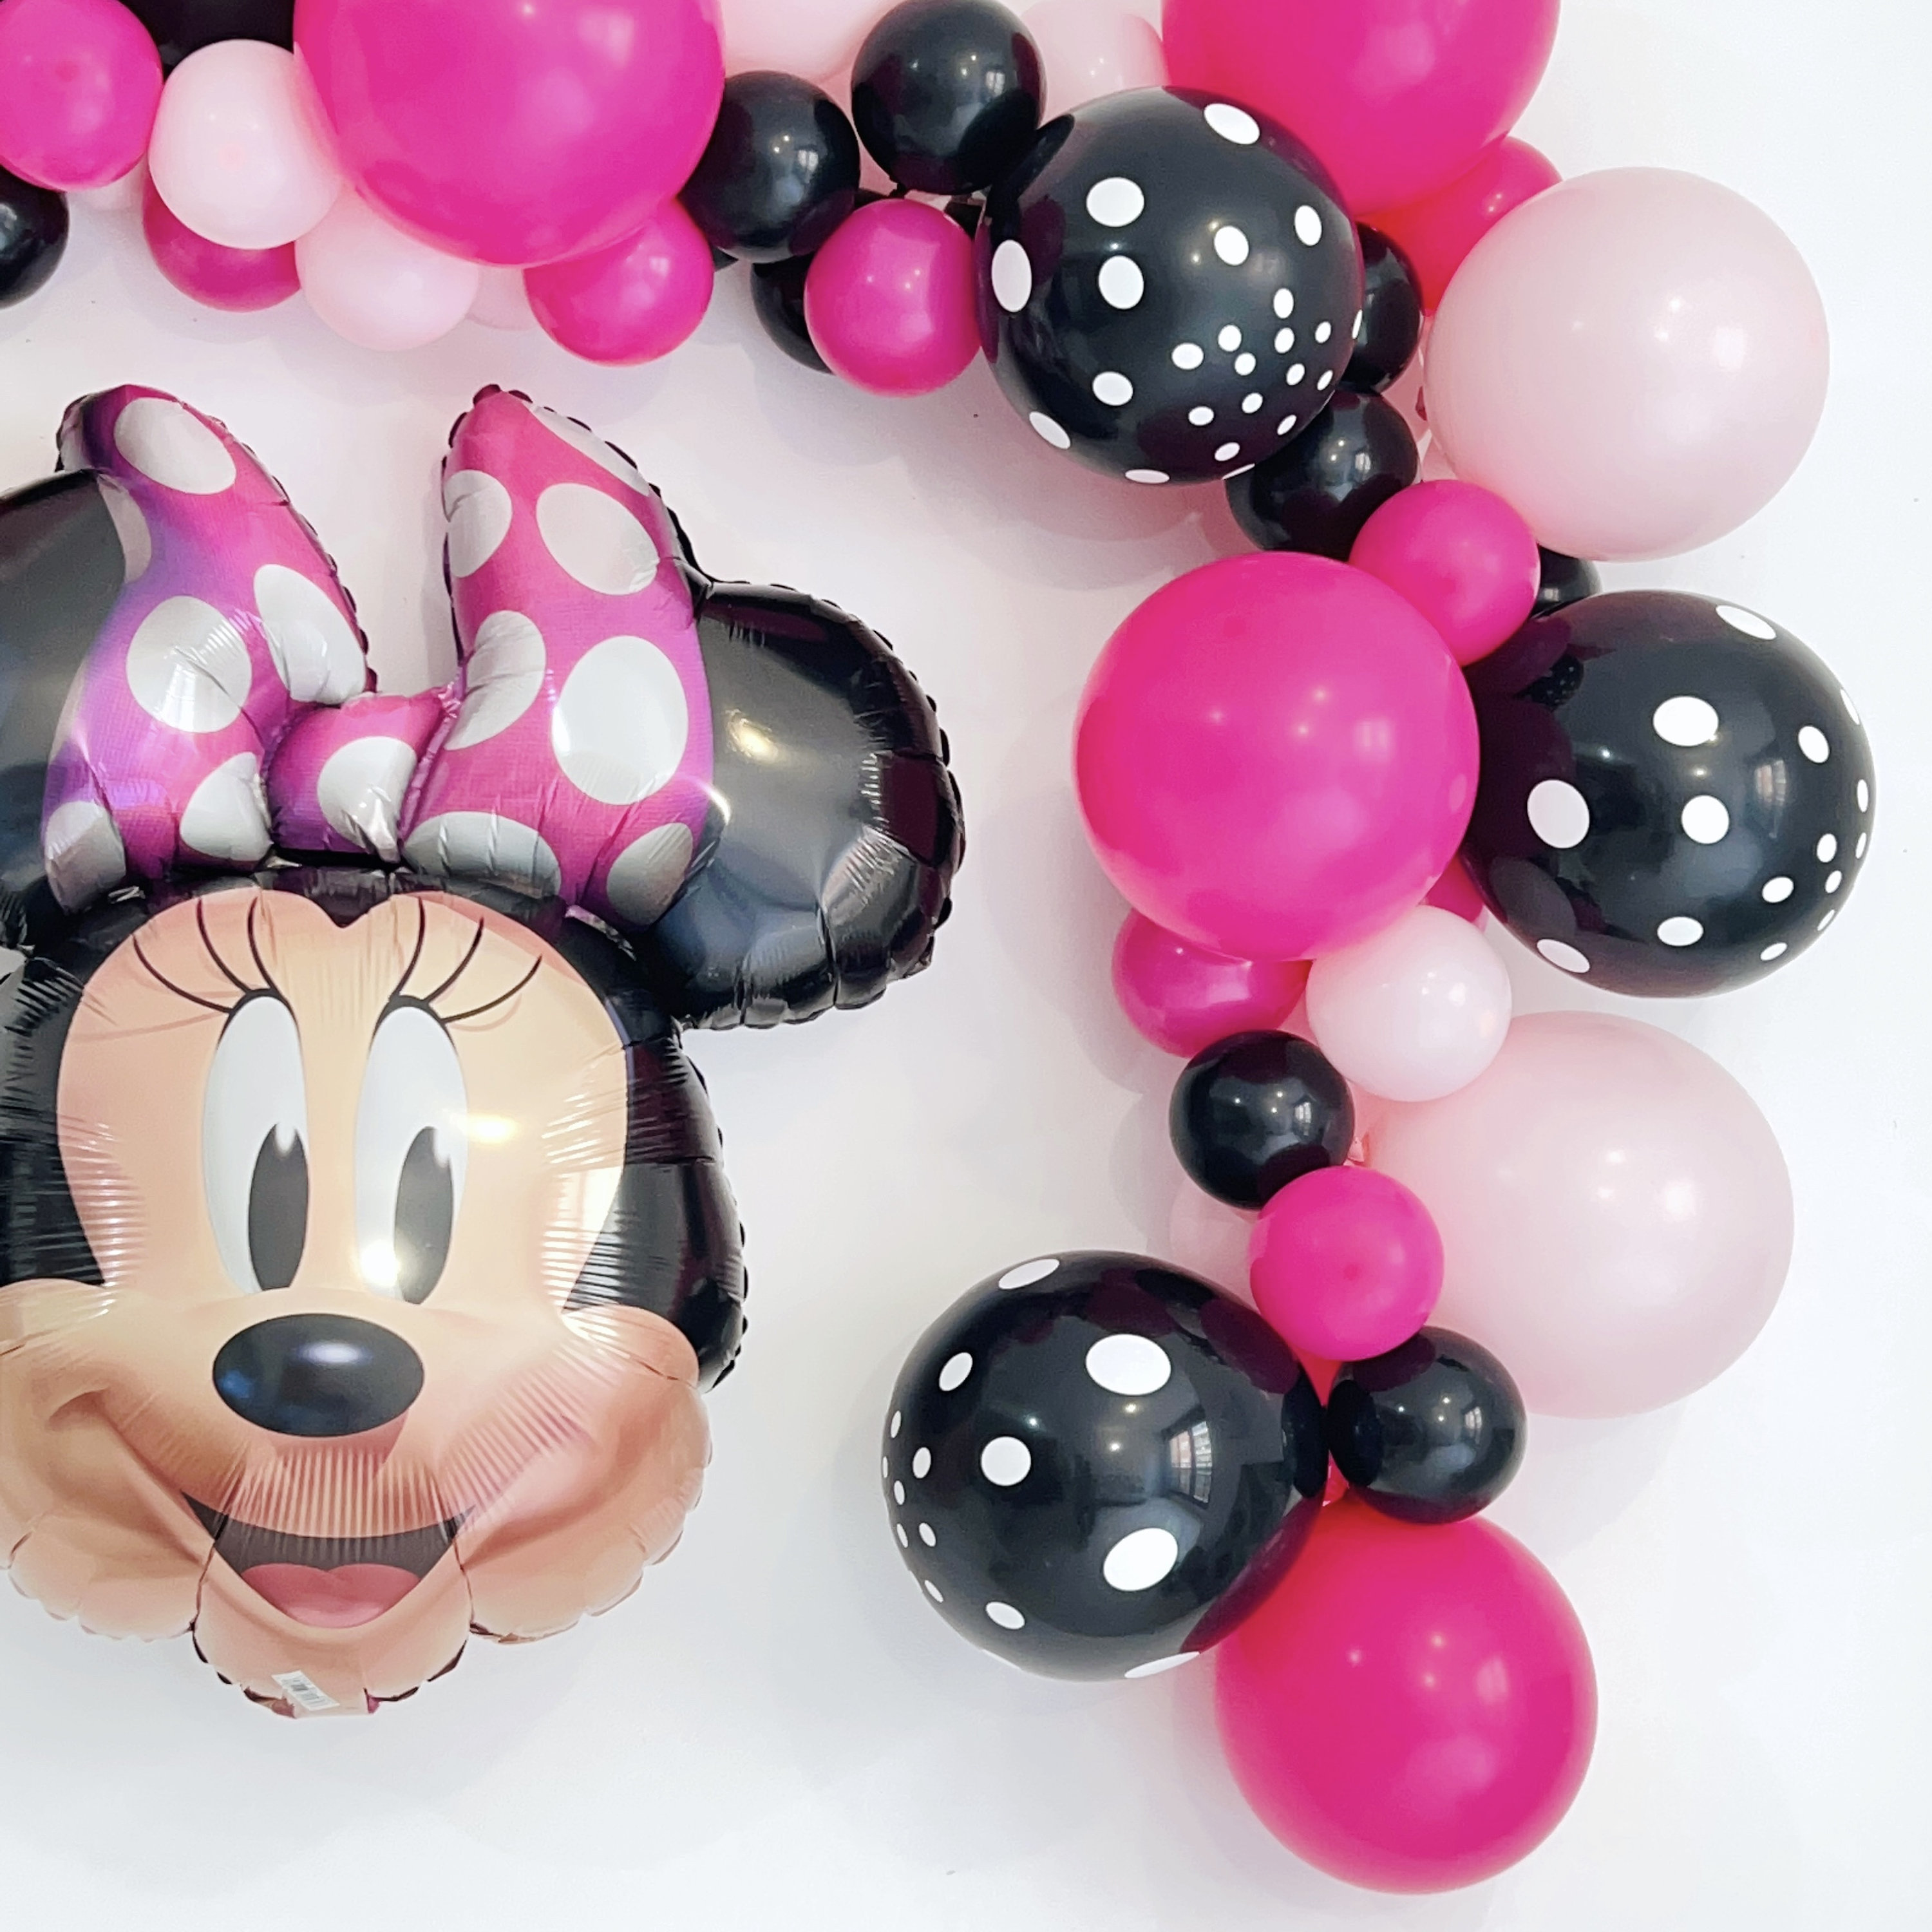 Minnie Mouse Birthday Decoration Makes 2 Balloon columns for party or Gift  kit, No helium or balloon stands needed, instructions included.